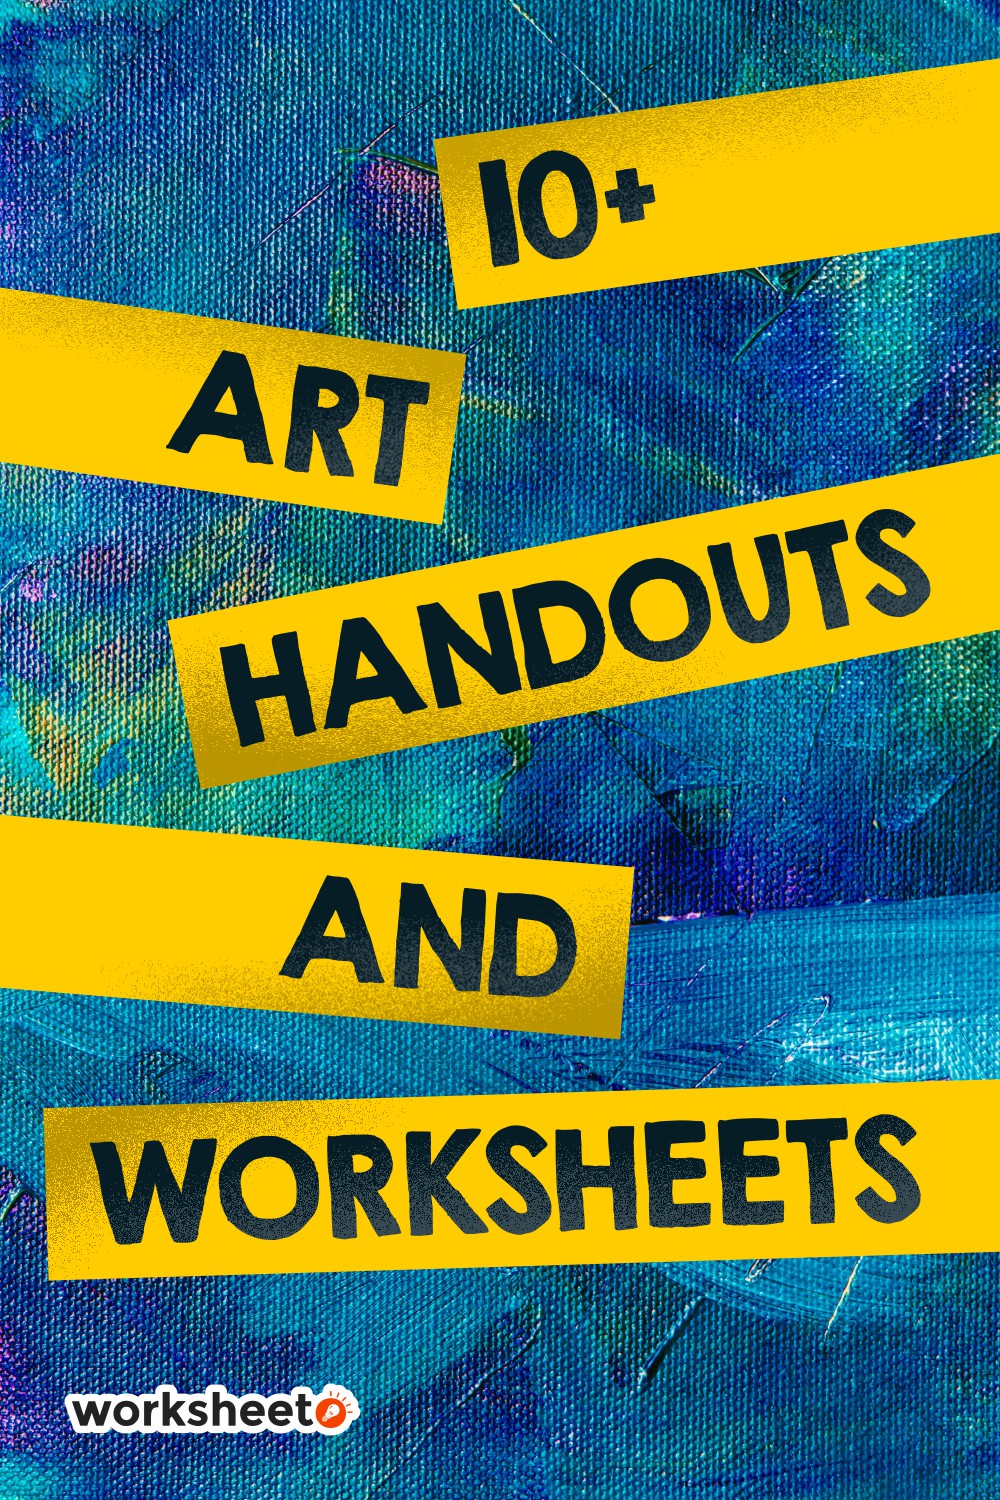 Art Handouts and Worksheets